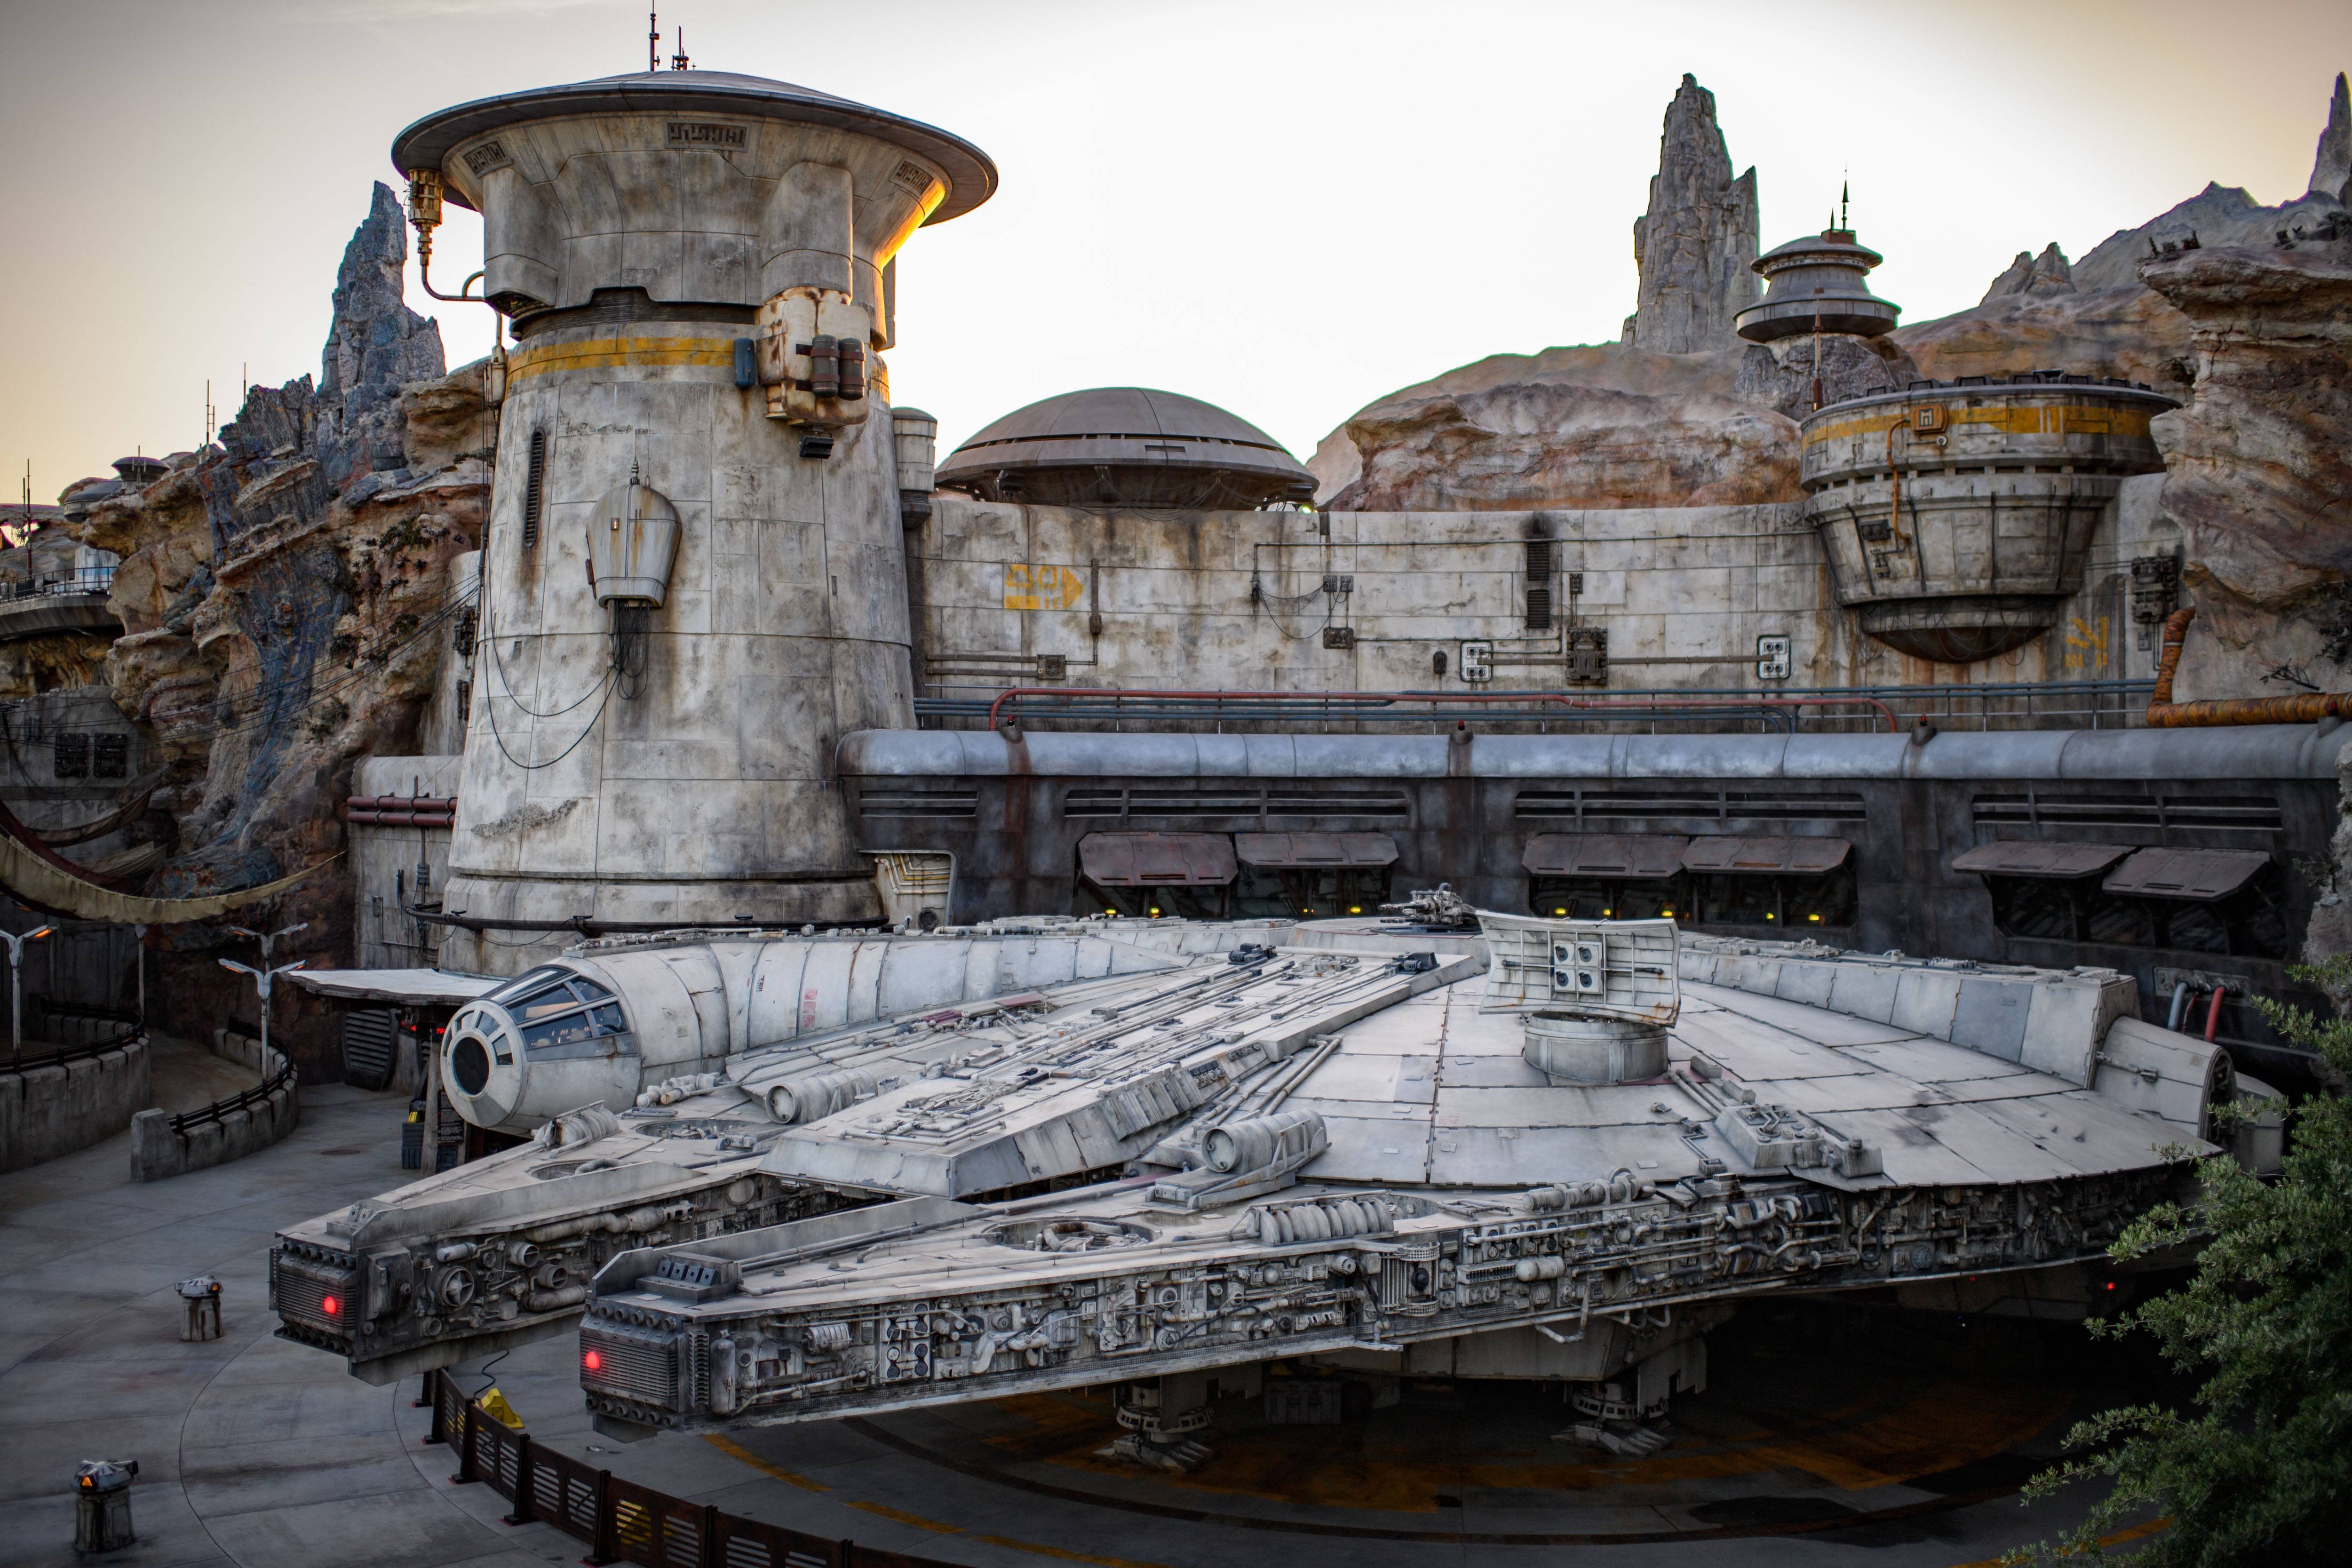 February's Disneyland 60 TV special will include a preview of the upcoming Star Wars themed lands